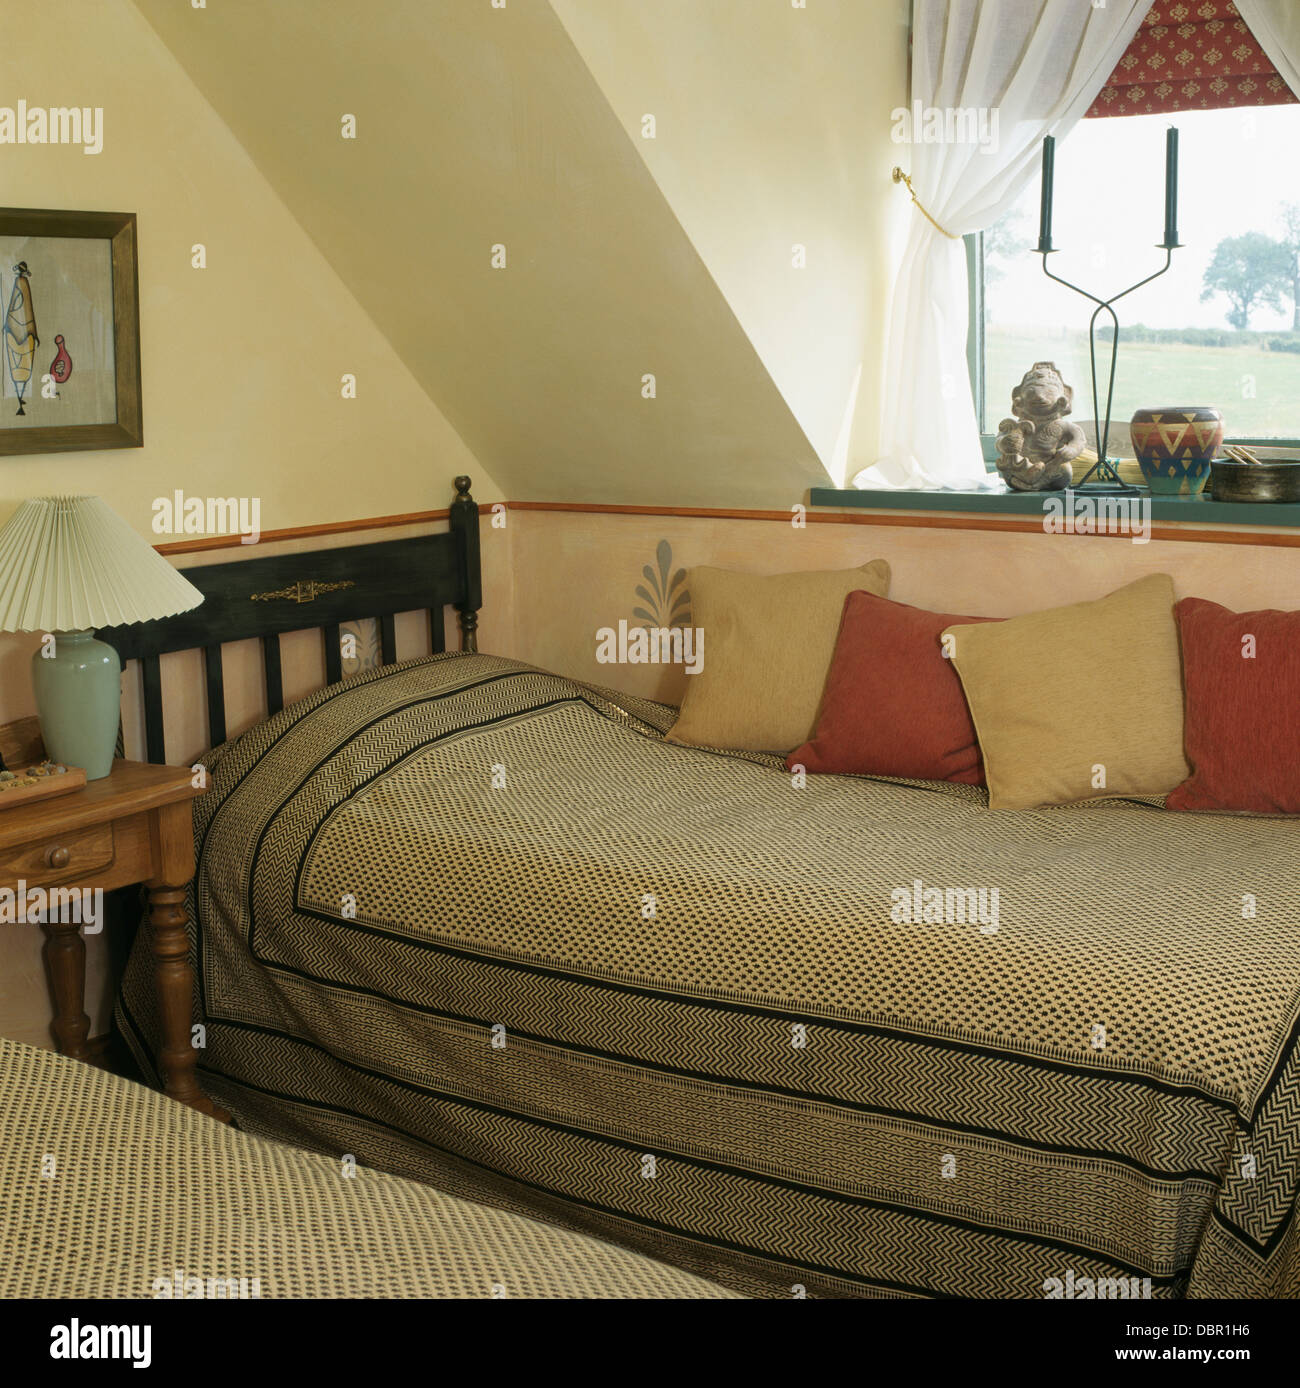 Patterned gray cotton bed covers on twin beds in economy-style attic bedroom Stock Photo